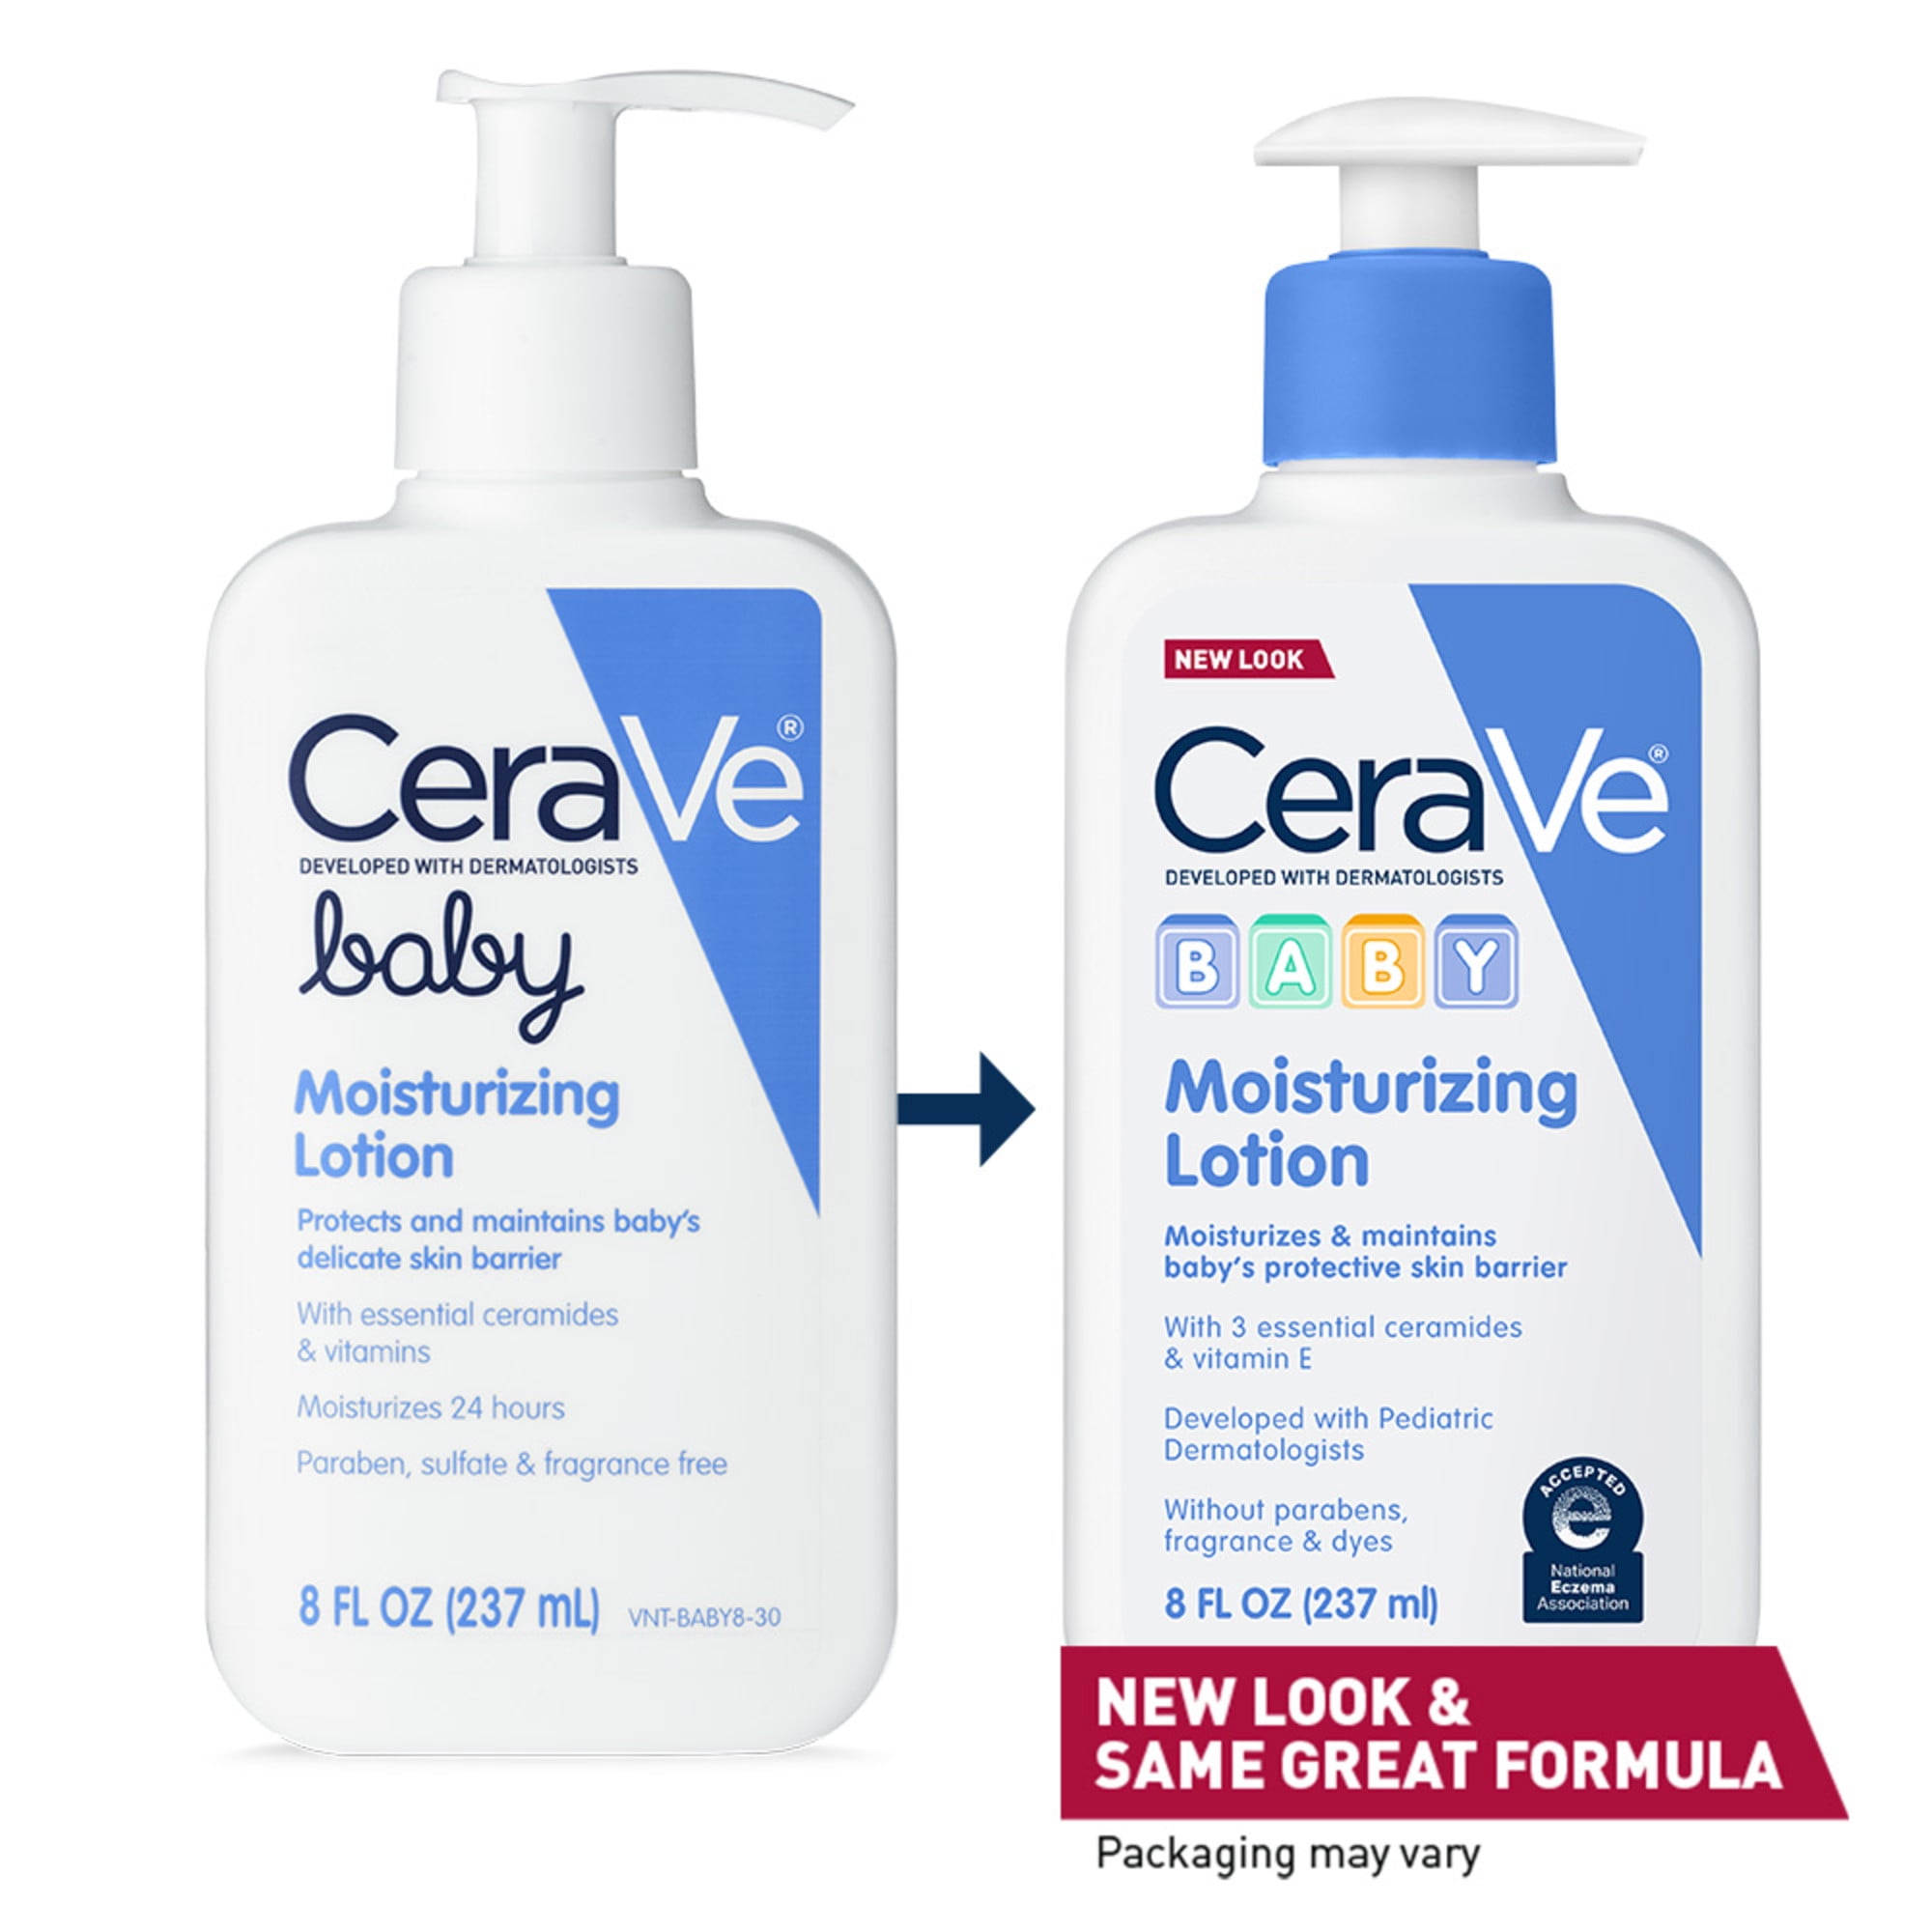 Okklusion Specialist Interessant CeraVe Baby Moisturizing Lotion with Vitamin E for Baby Skin, 8 fl oz,  Fragrance Free - Walmart.com